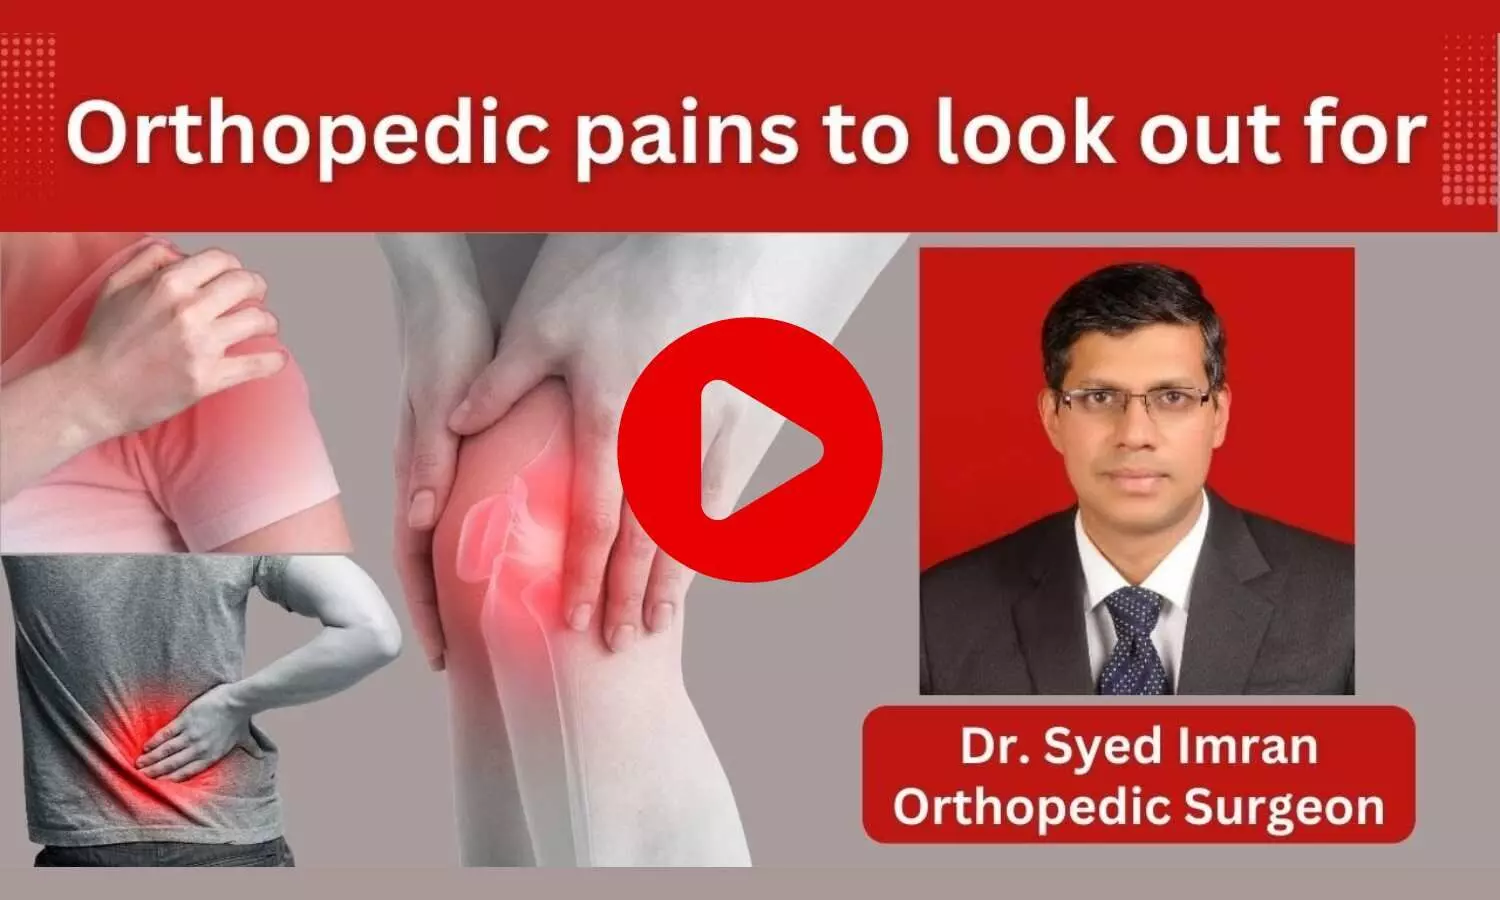 What are the most common orthopedic pains? Ft. Dr Syed Imran (Orthopedic Surgeon)